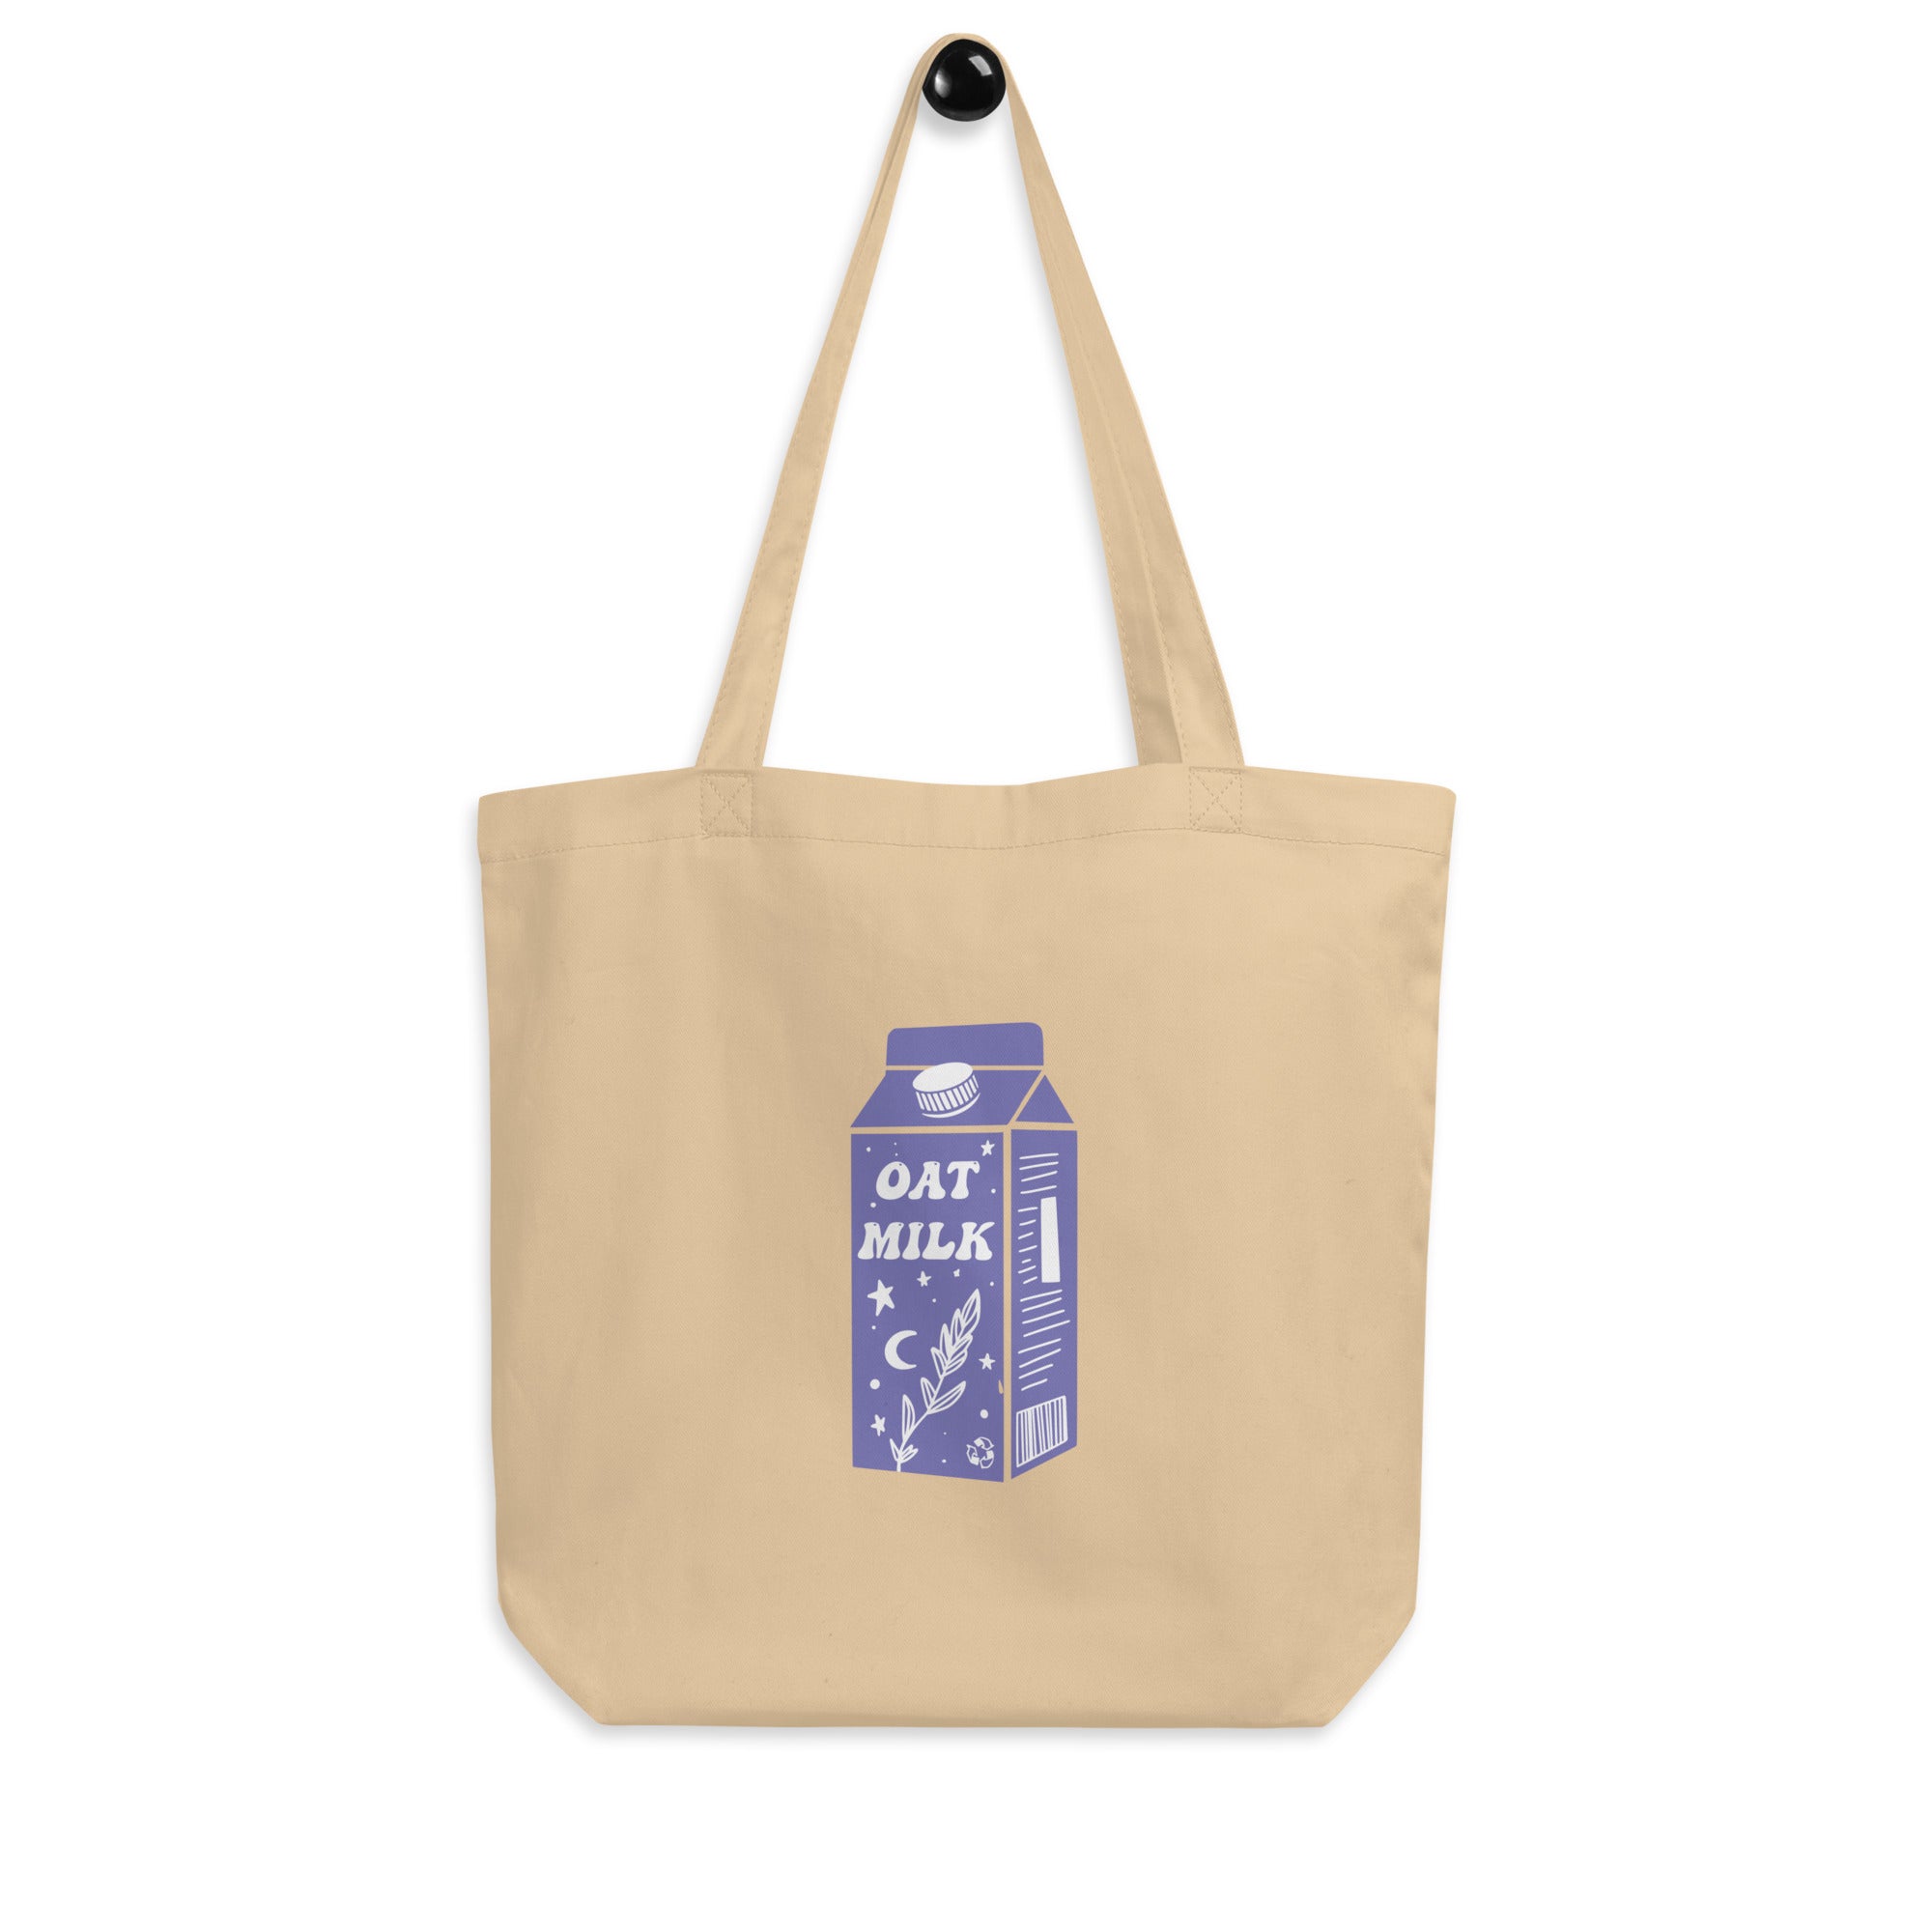 Oat Milk - Recycled Fabric Tote Bag - Neon Yellow